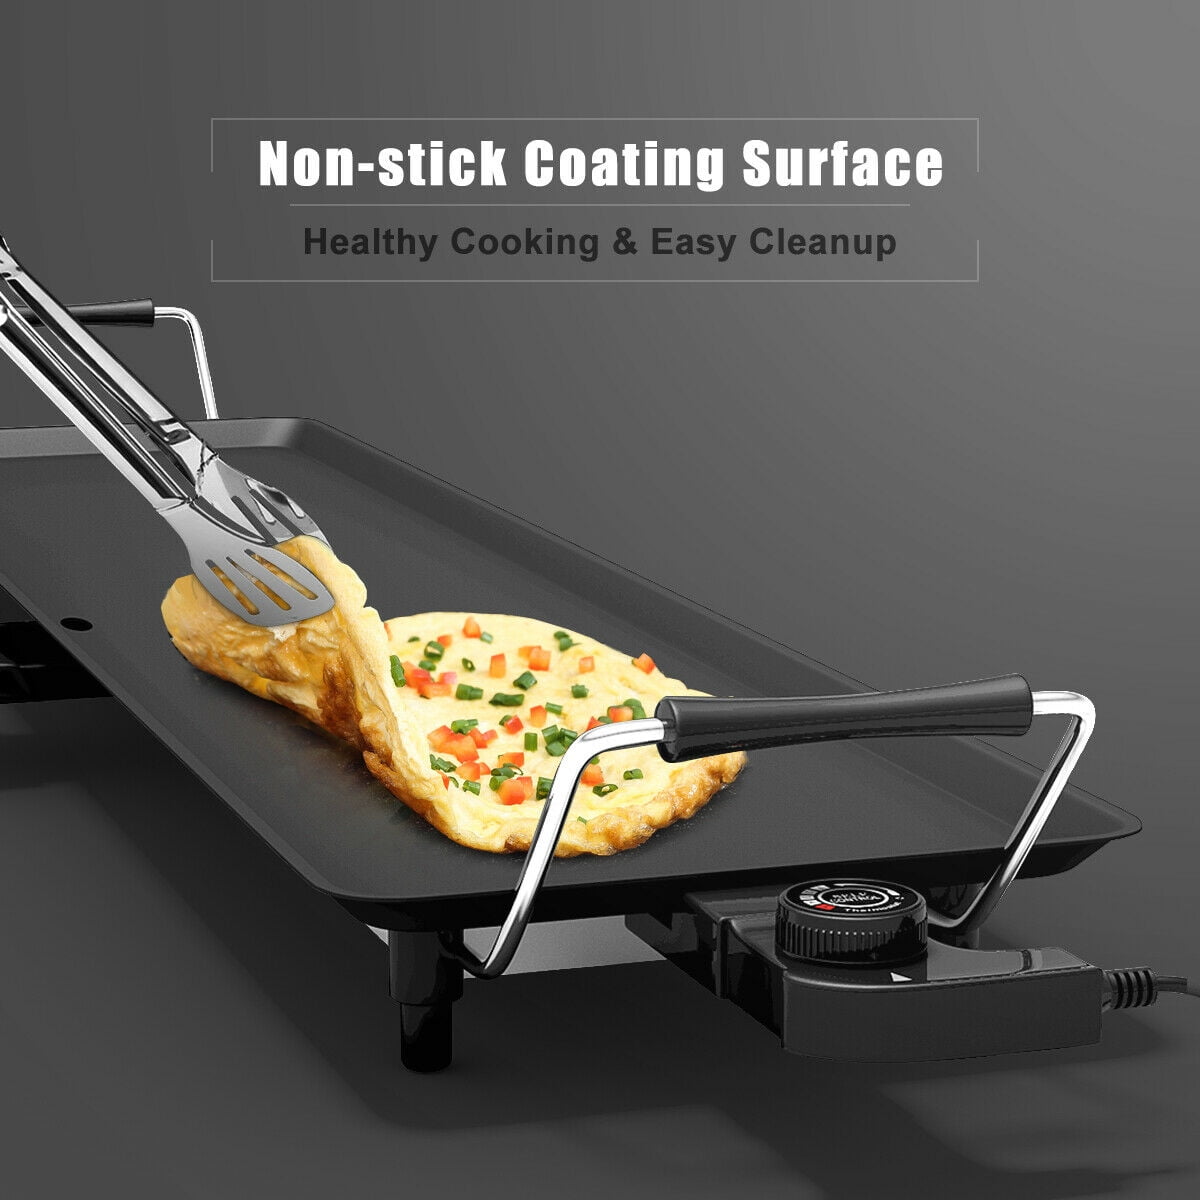 Easy to Clean for Camping Caravanning Holidays Teppanyaki Grill Griddle 1500W Table Electric Hot Plate BBQ Griddle Fast Heat Anti-Skid Bracket Adjustable Temperature 5 Setting